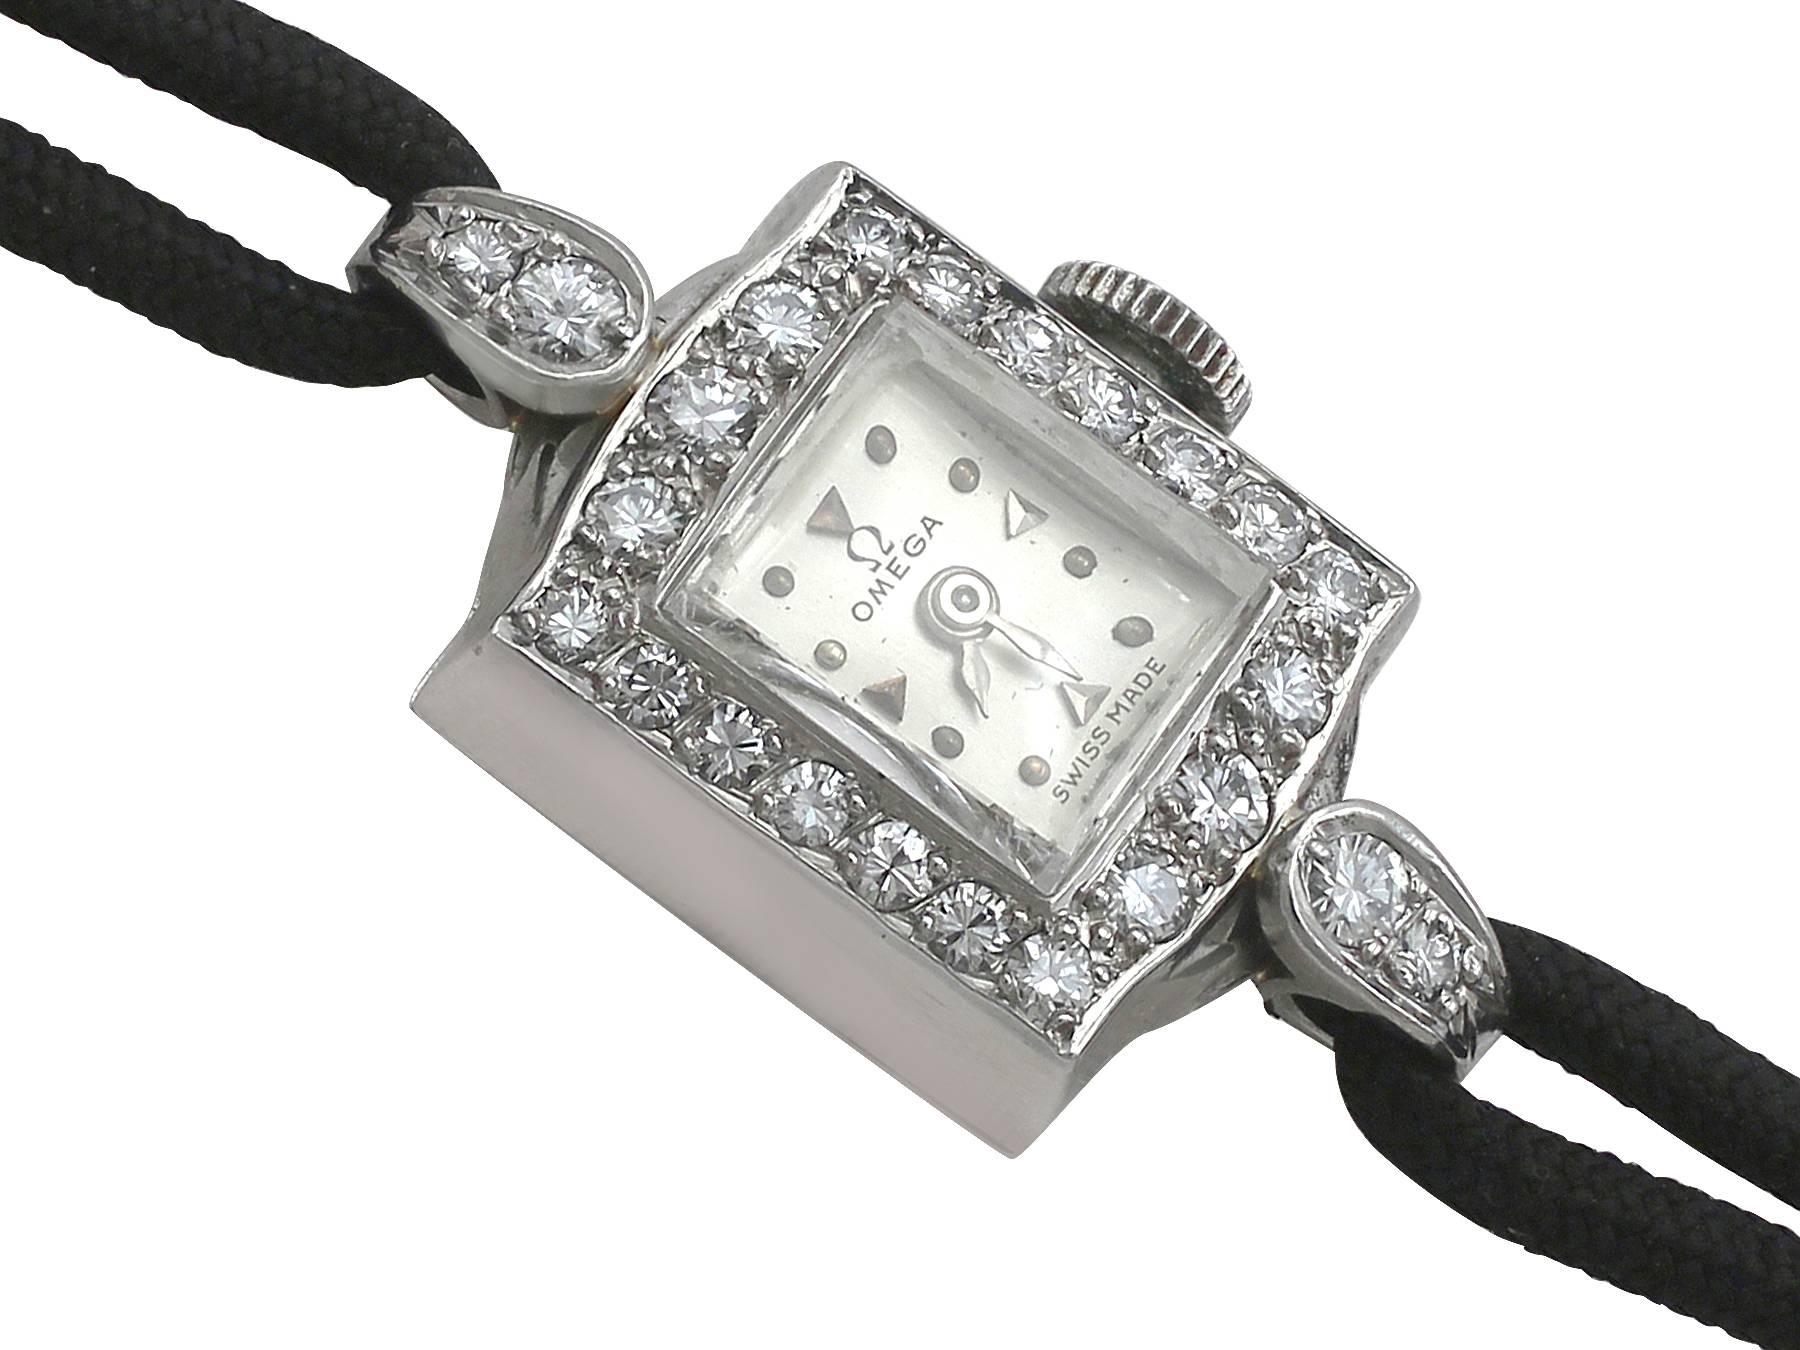 An impressive vintage 0.78 carat diamond and platinum cocktail watch by Omega; part of our diverse ladies diamond watch collections

This fine and impressive vintage Omega diamond watch has been crafted in platinum.

The watch has a rectangular dial